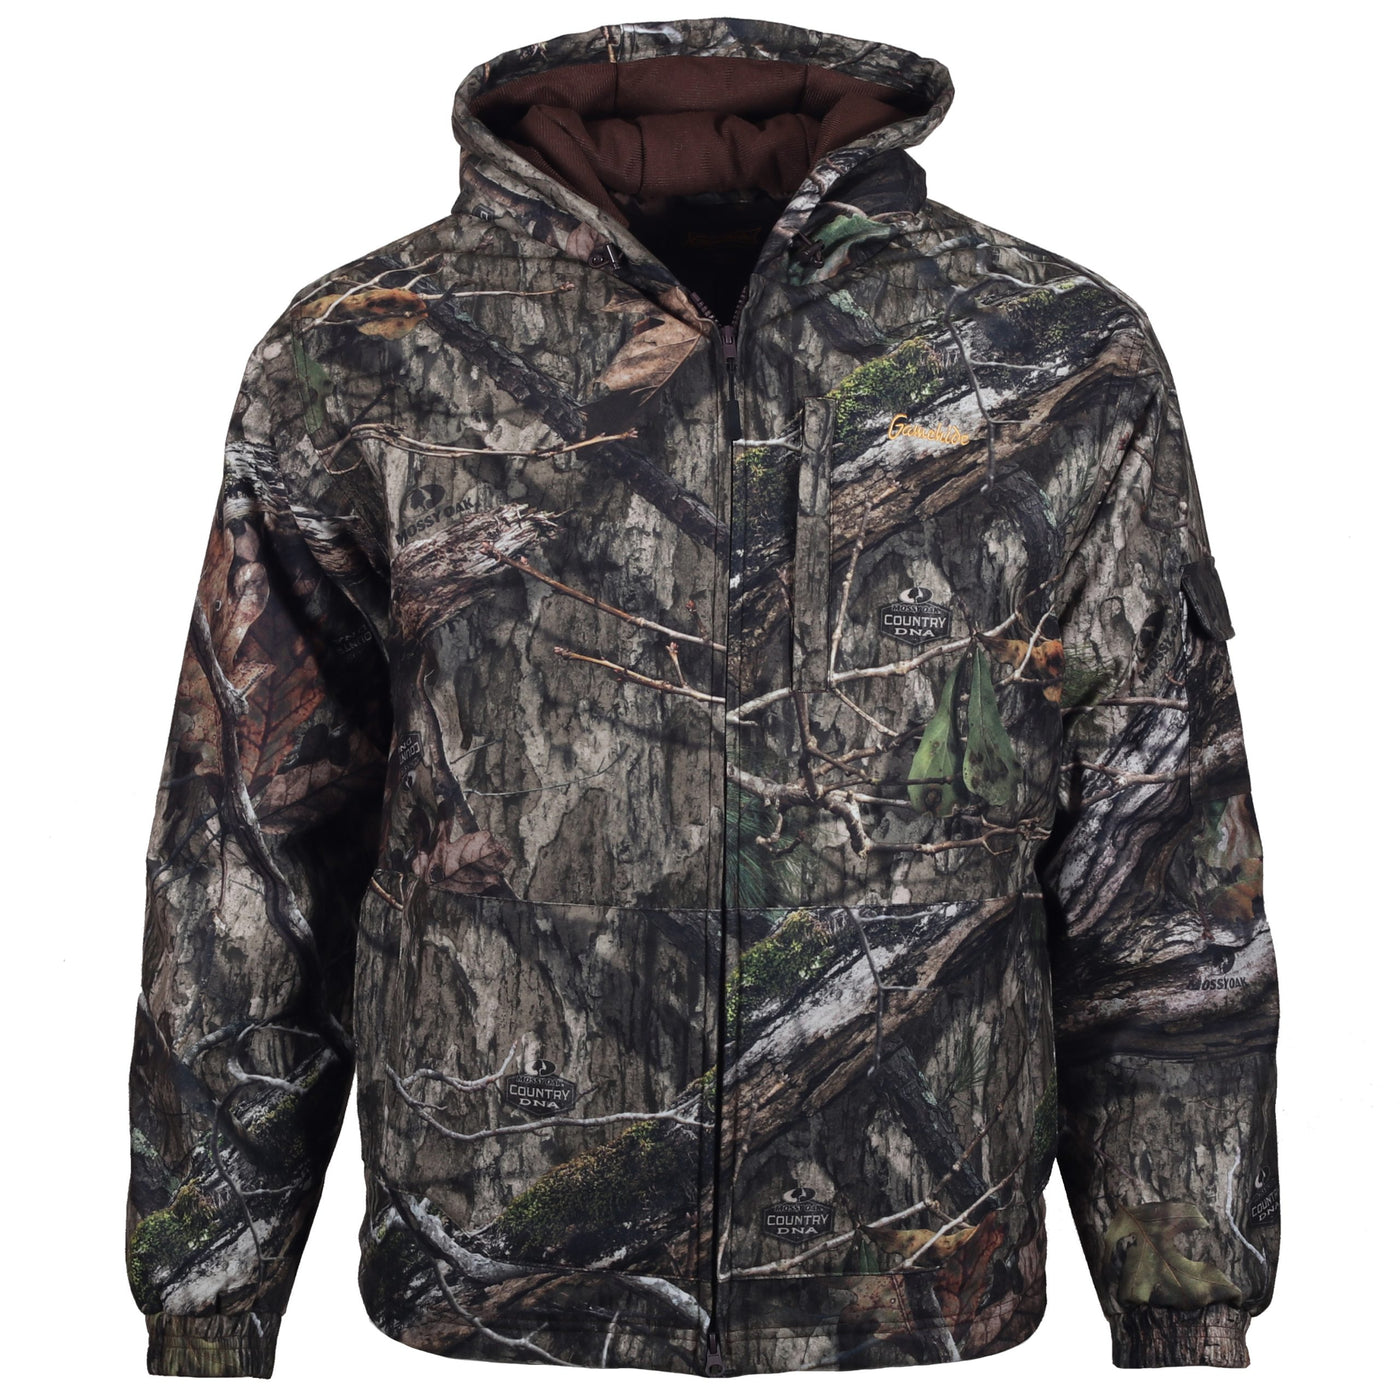 Gamehide Tundra Jacket-HUNTING/OUTDOORS-Country DNA-M-Kevin's Fine Outdoor Gear & Apparel